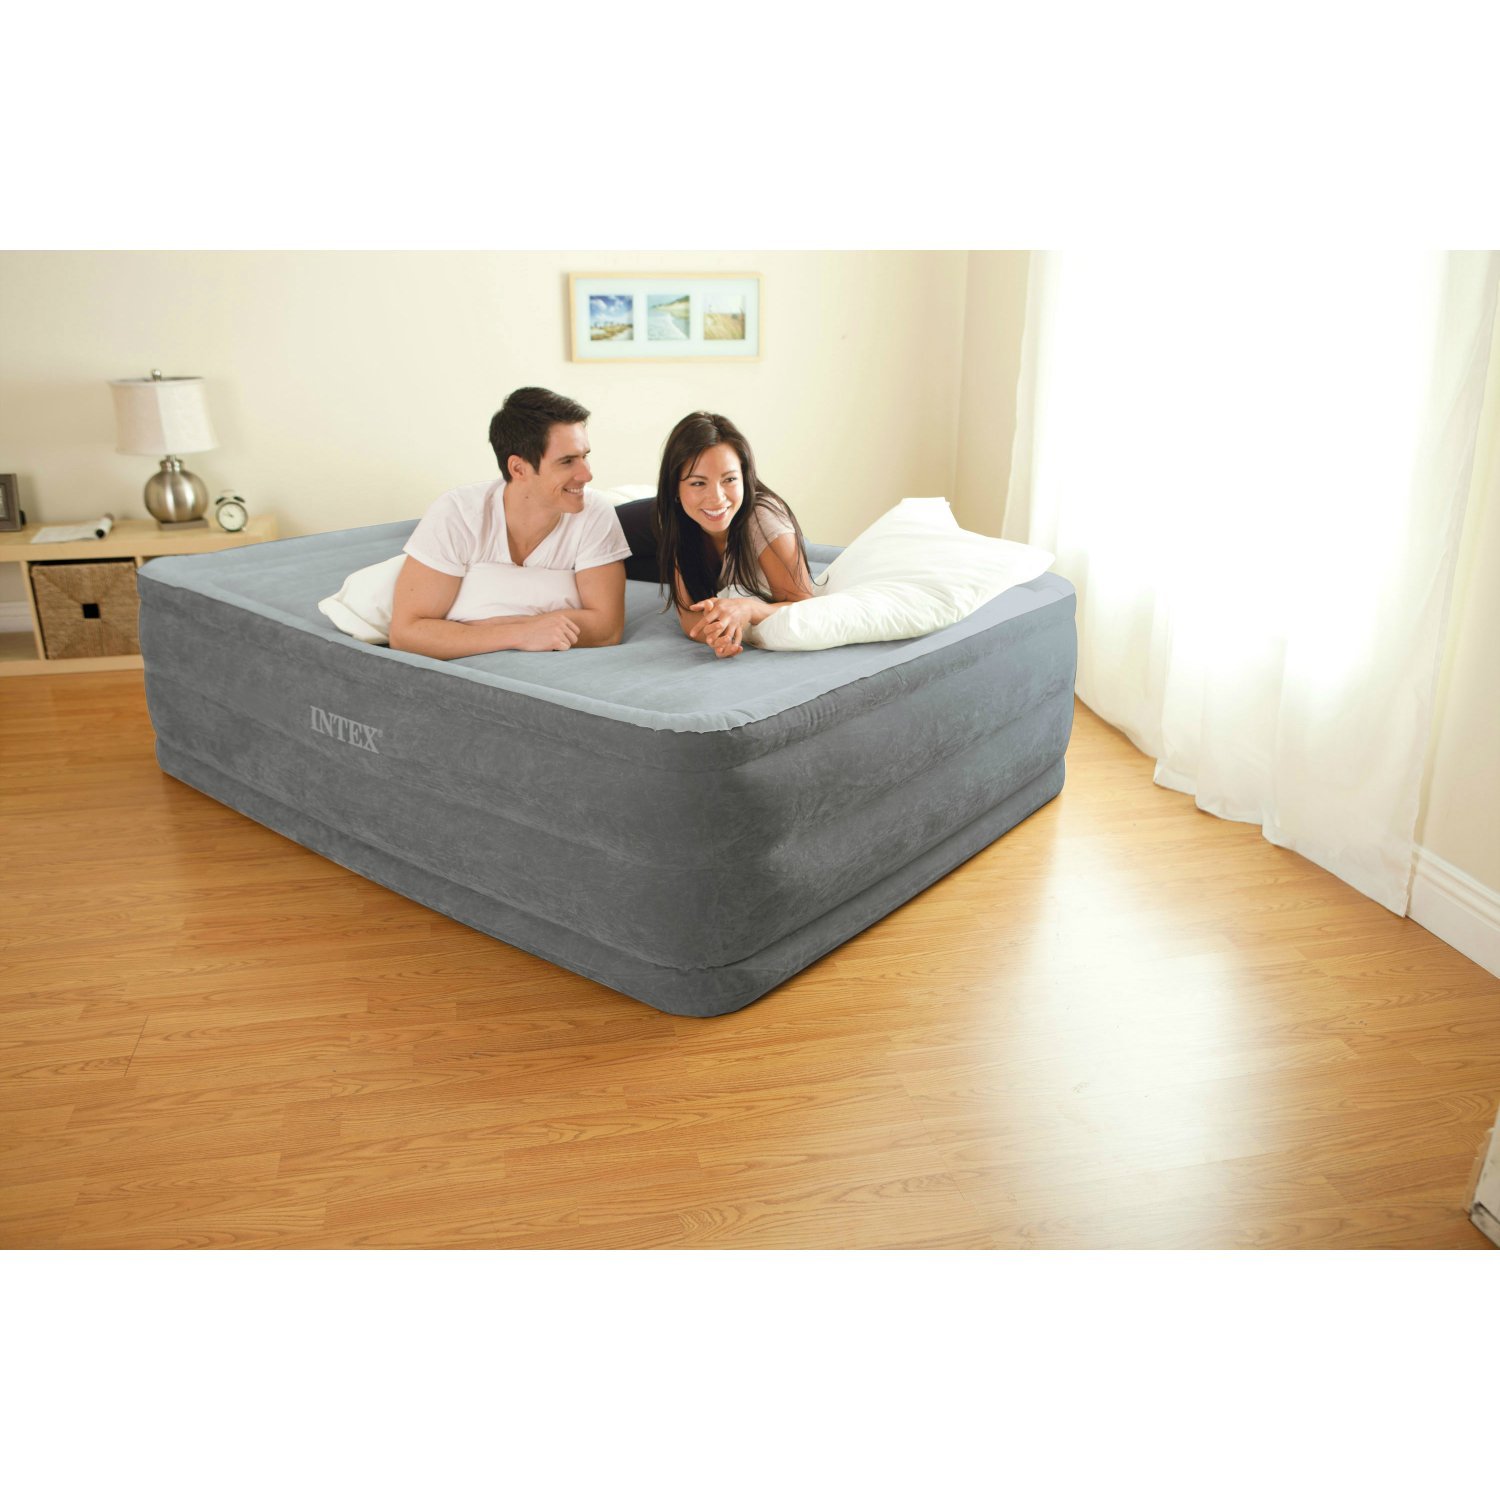 Best king size air mattress for couples